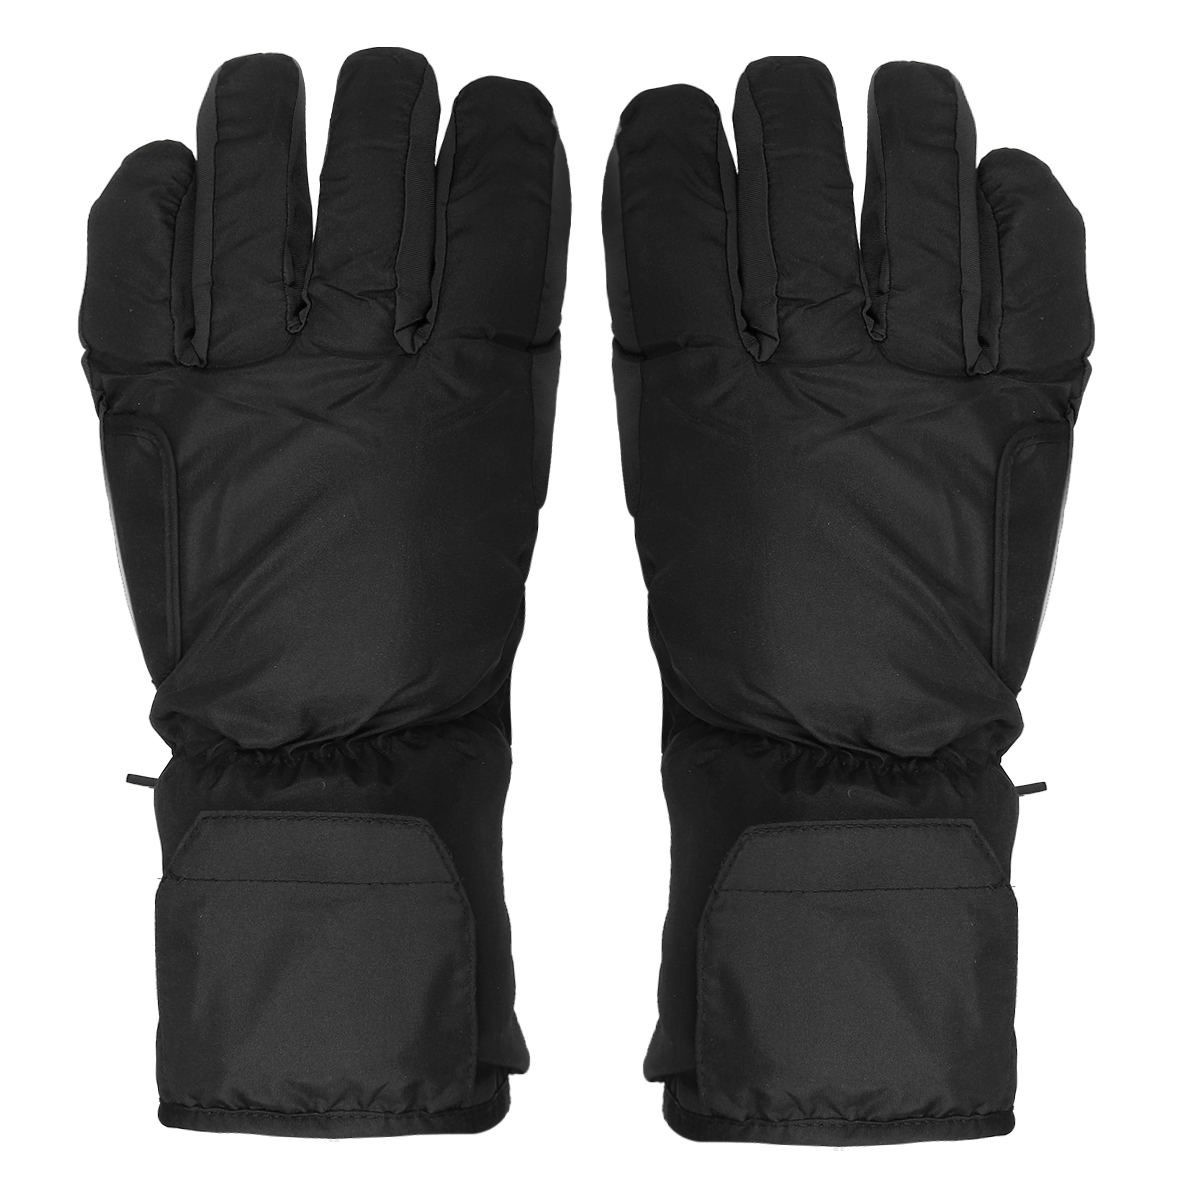 45V-Smart-Electric-Heated-Gloves-Winter-Ski-Cycling-Keep-Warm-Battery-Powered-Heating-Gloves-5-Finge-1771505-4